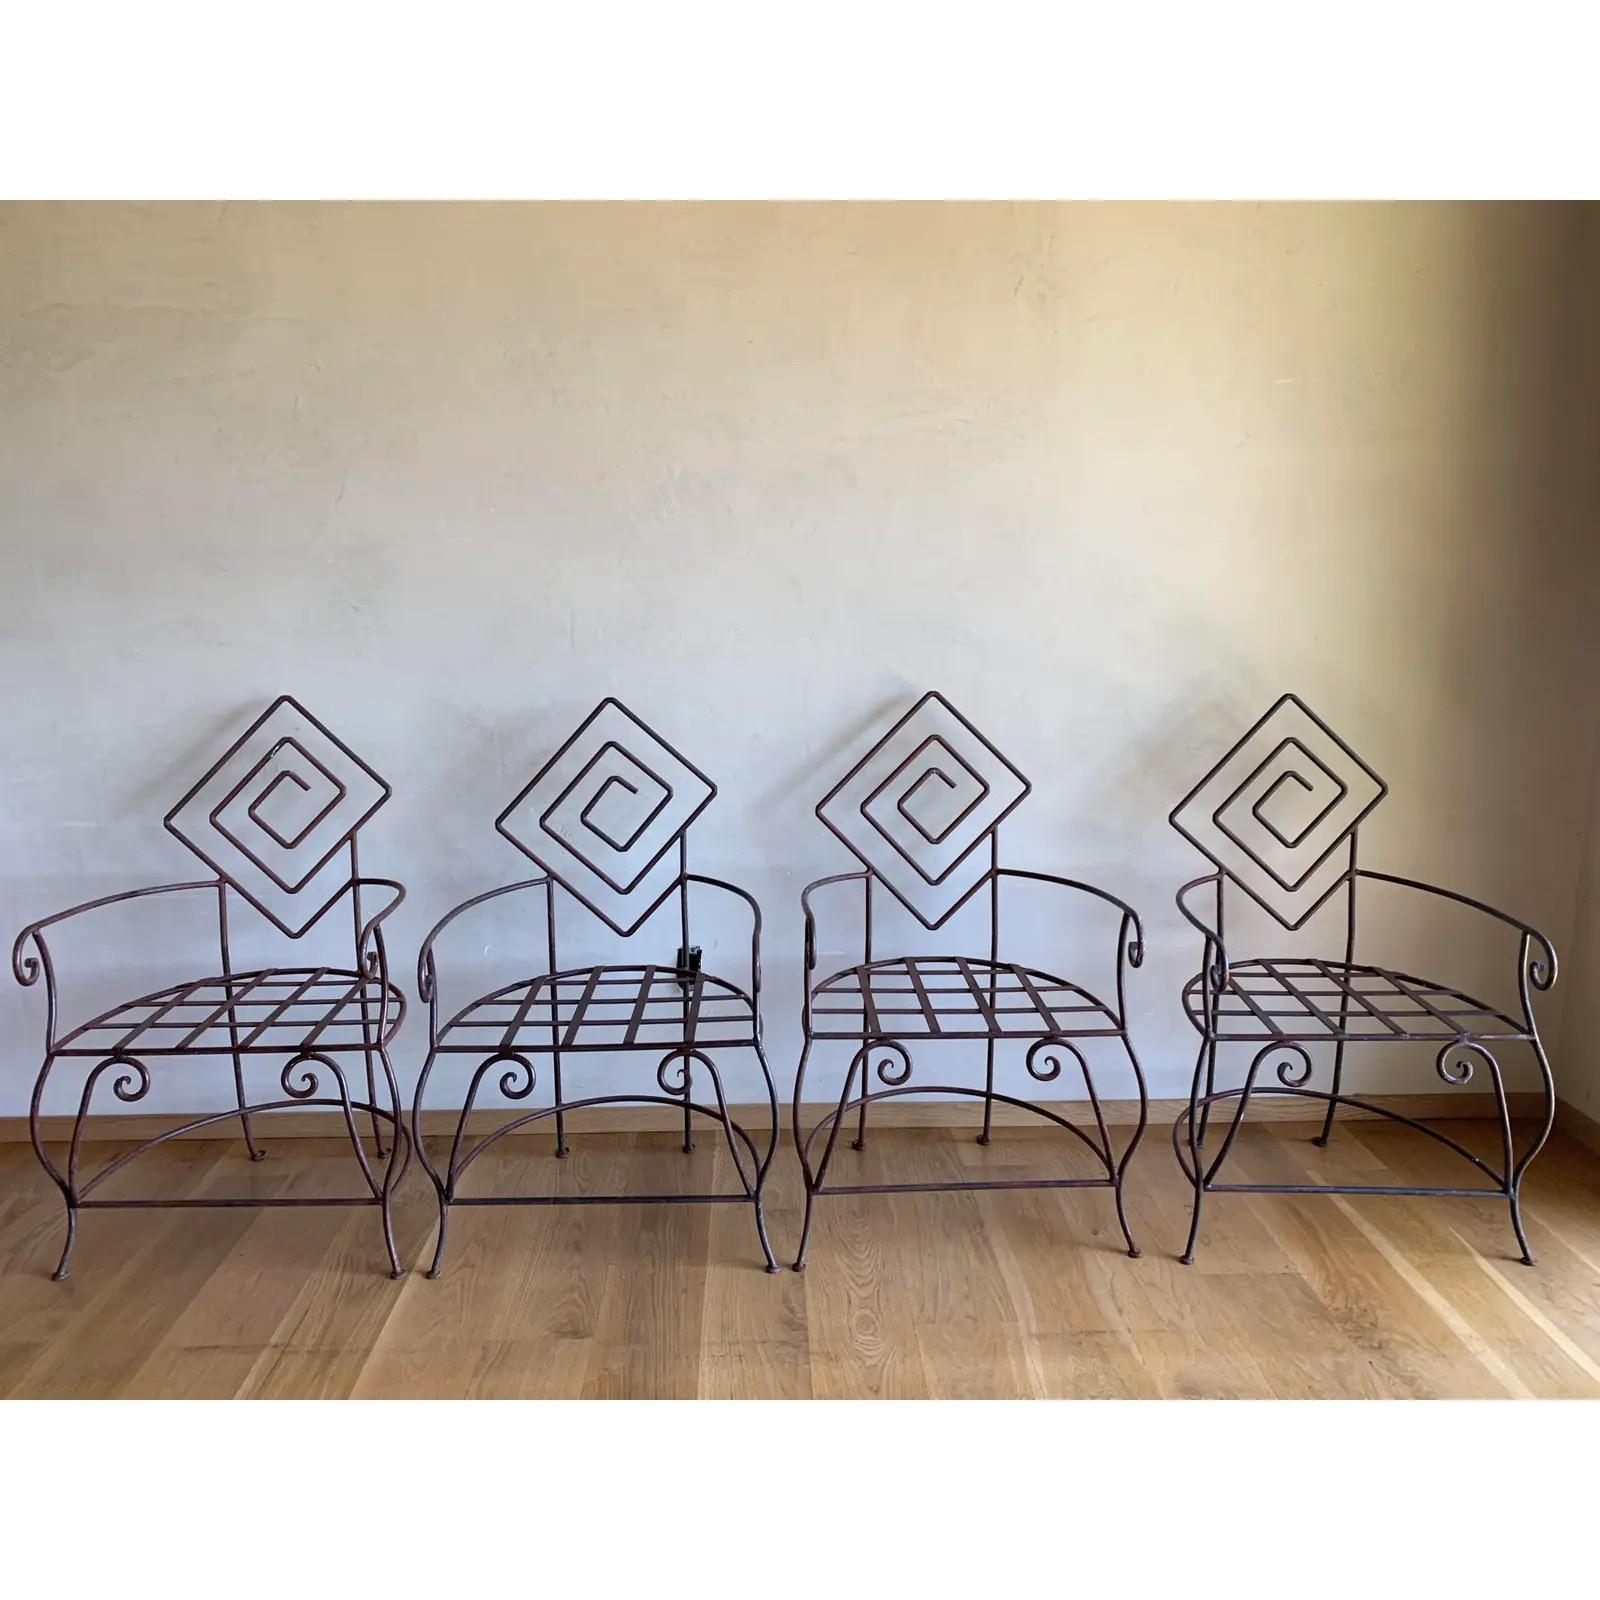 Set of four very sculptural, heavy-duty, handmade artisan iron chairs with wide, curving biomorphic arms and legs culminating in maze-like, geometric backrests.
Extremely unique, sturdy statement pieces that will last forever!
Multi-hued, bronze-y